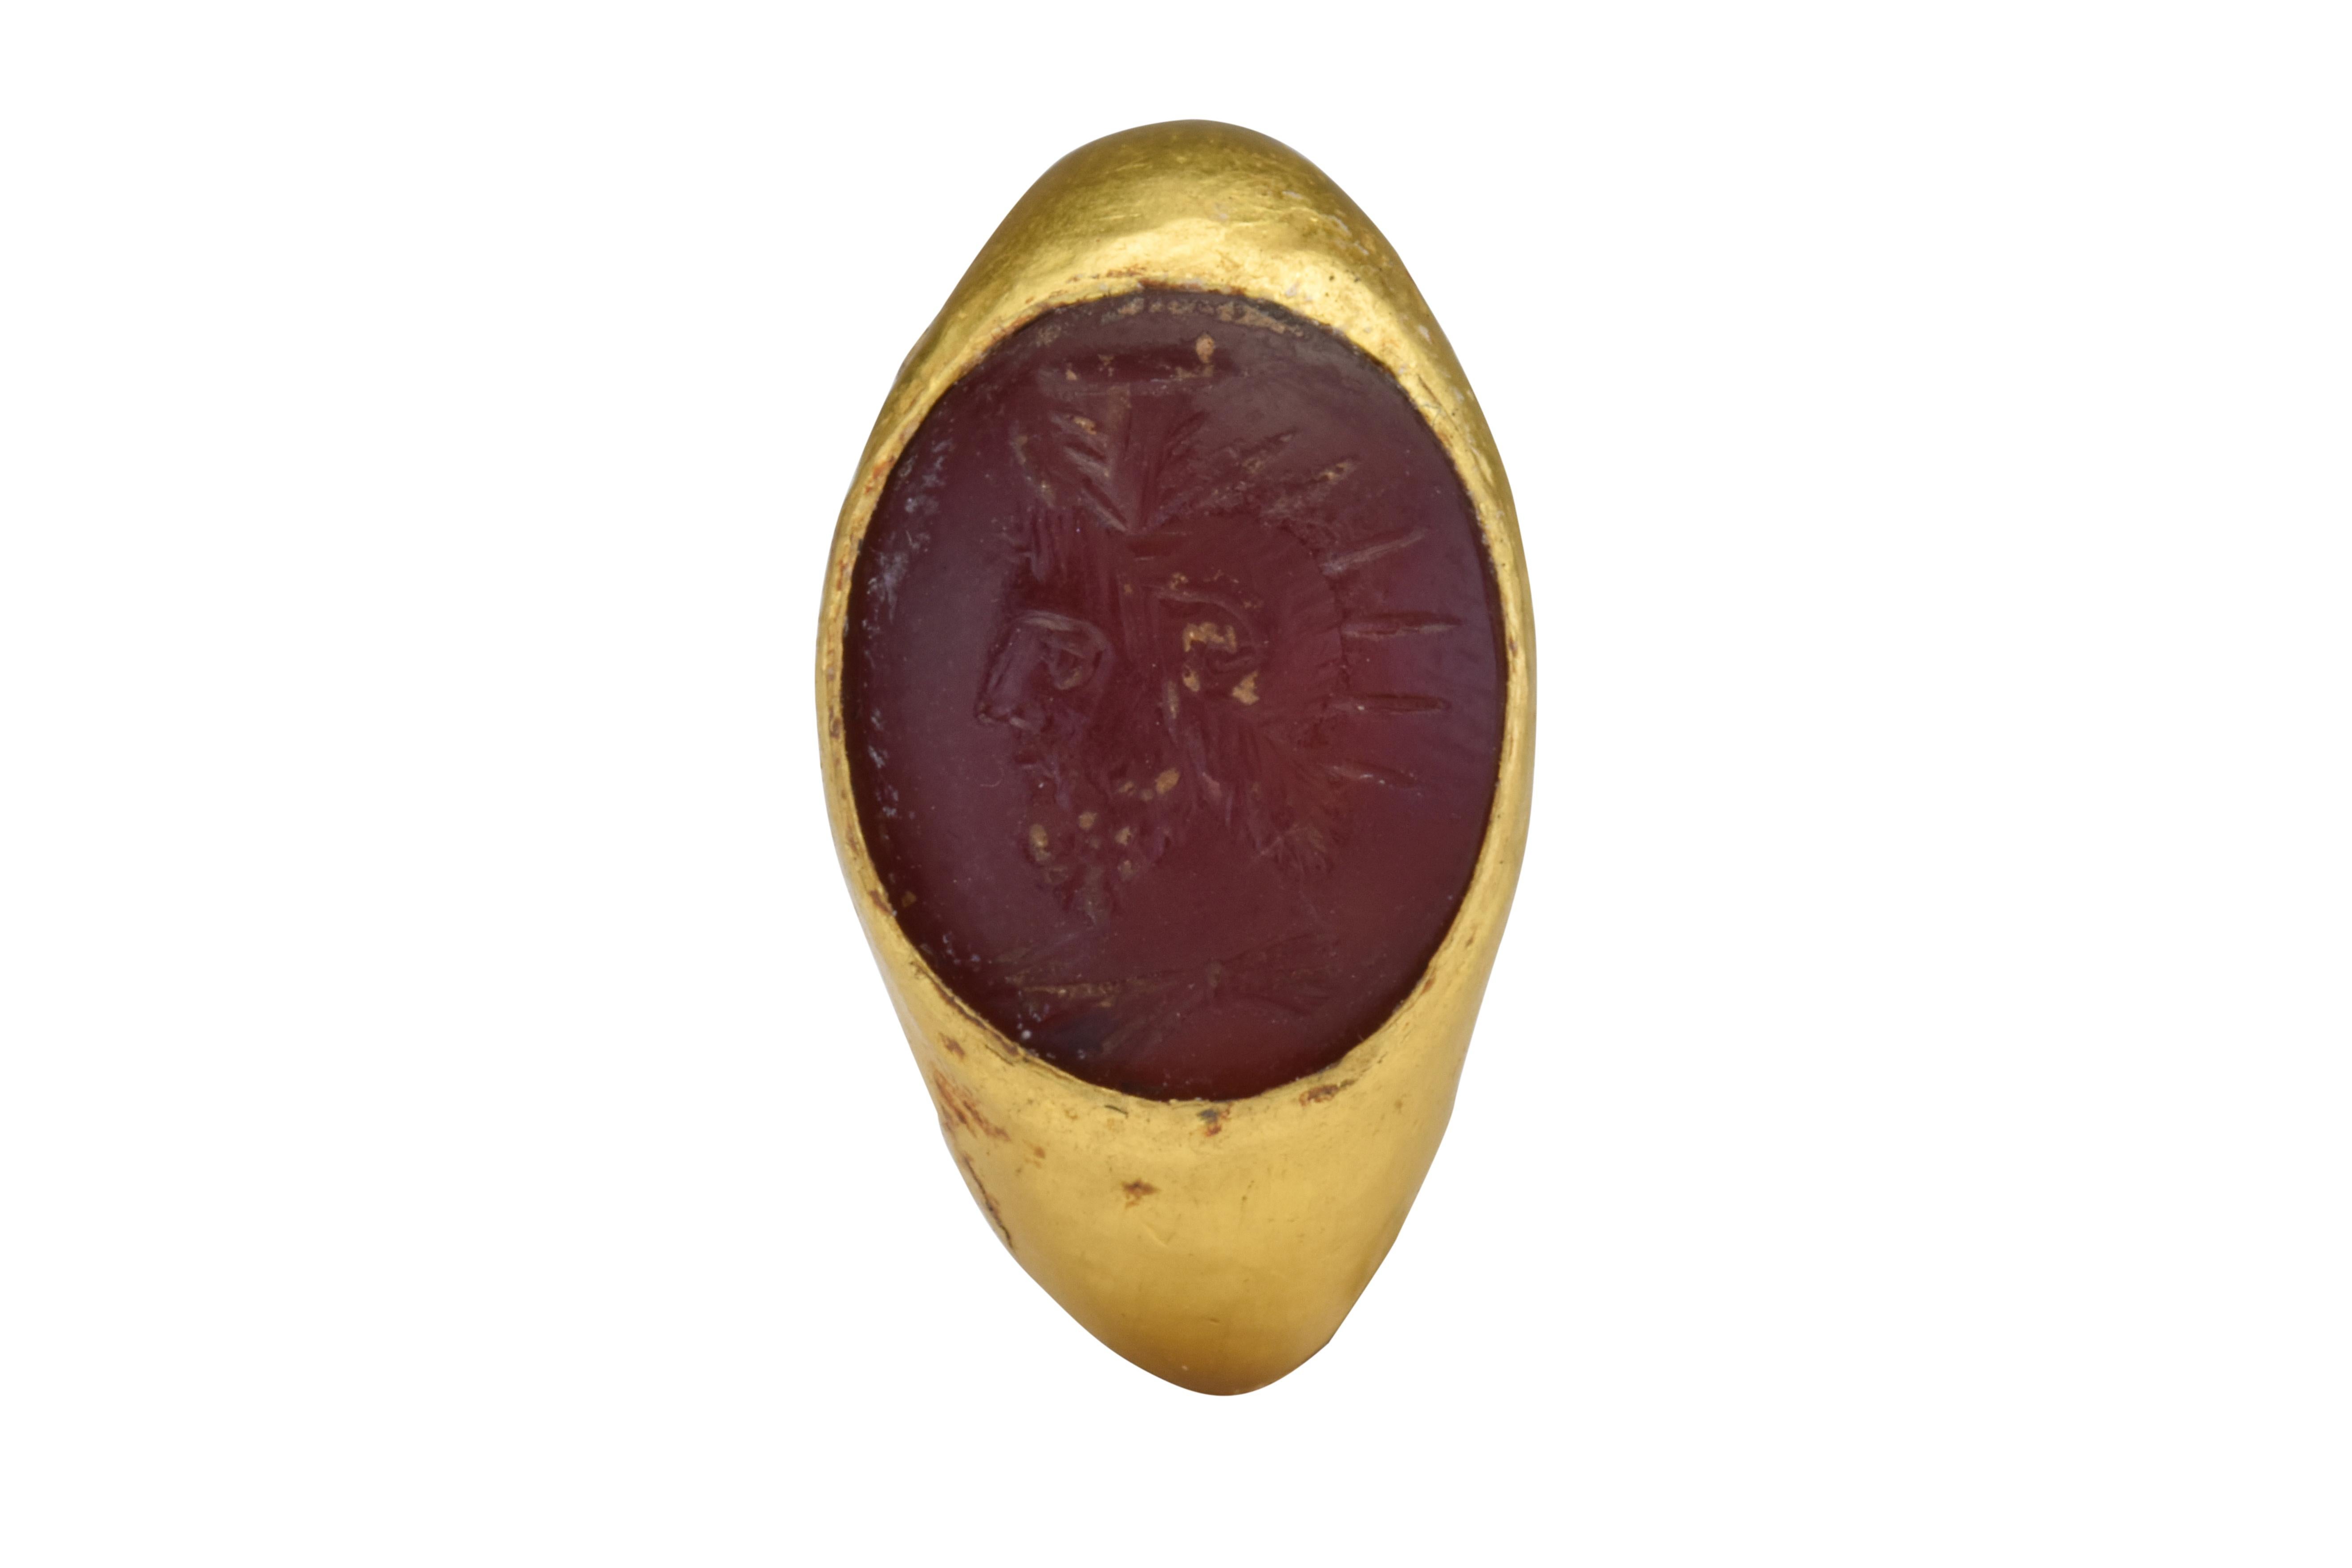 Ancient Roman Signet Carnelian Intaglio of a Warrior in Gold Ring

Ca. 100-200 AD

Nicely carved Centurion with helmet, facing left in a carnelian intaglio of 23K gold, nicely detailed.

Size: D: 3 5/8mm / US: 14.56 / UK: G 1/2; 3.61g

Provenance: